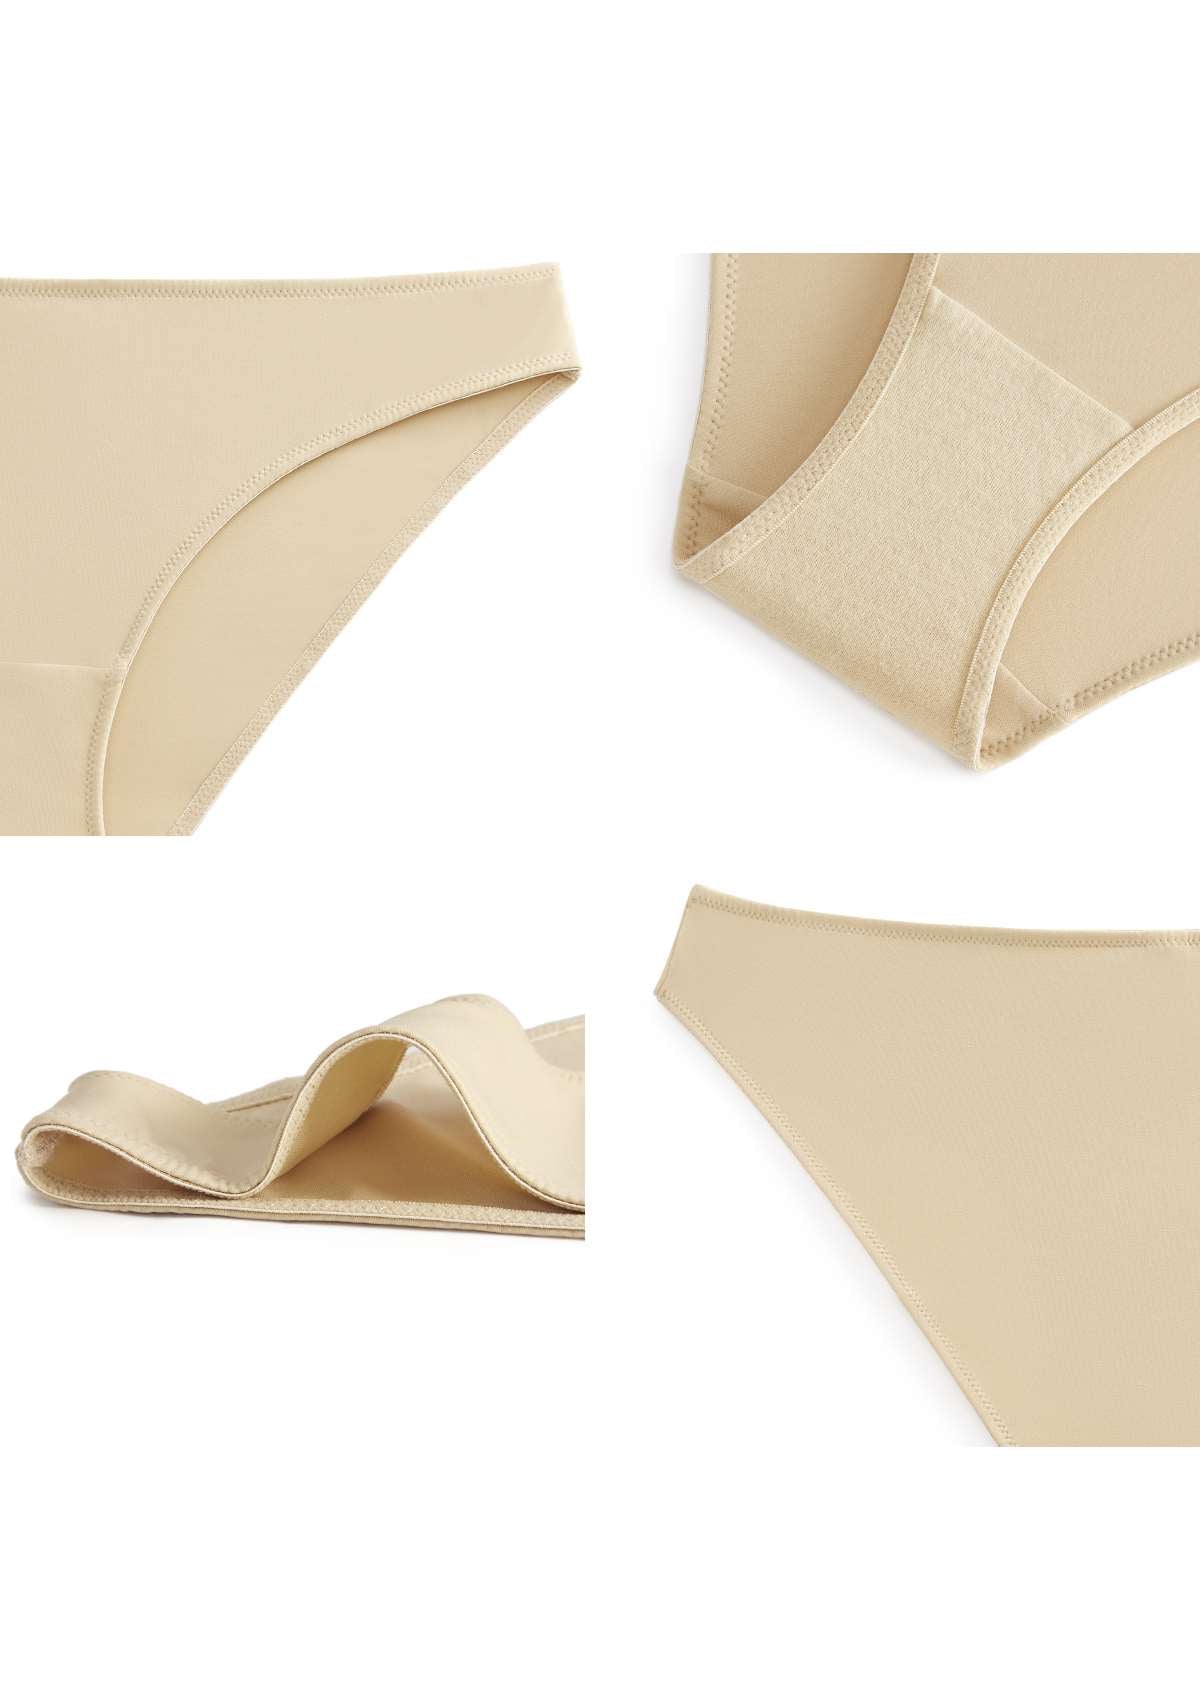 HSIA Patricia Smooth Classic Soft Stretch Panty - Everyday Comfort - XXL / Beige